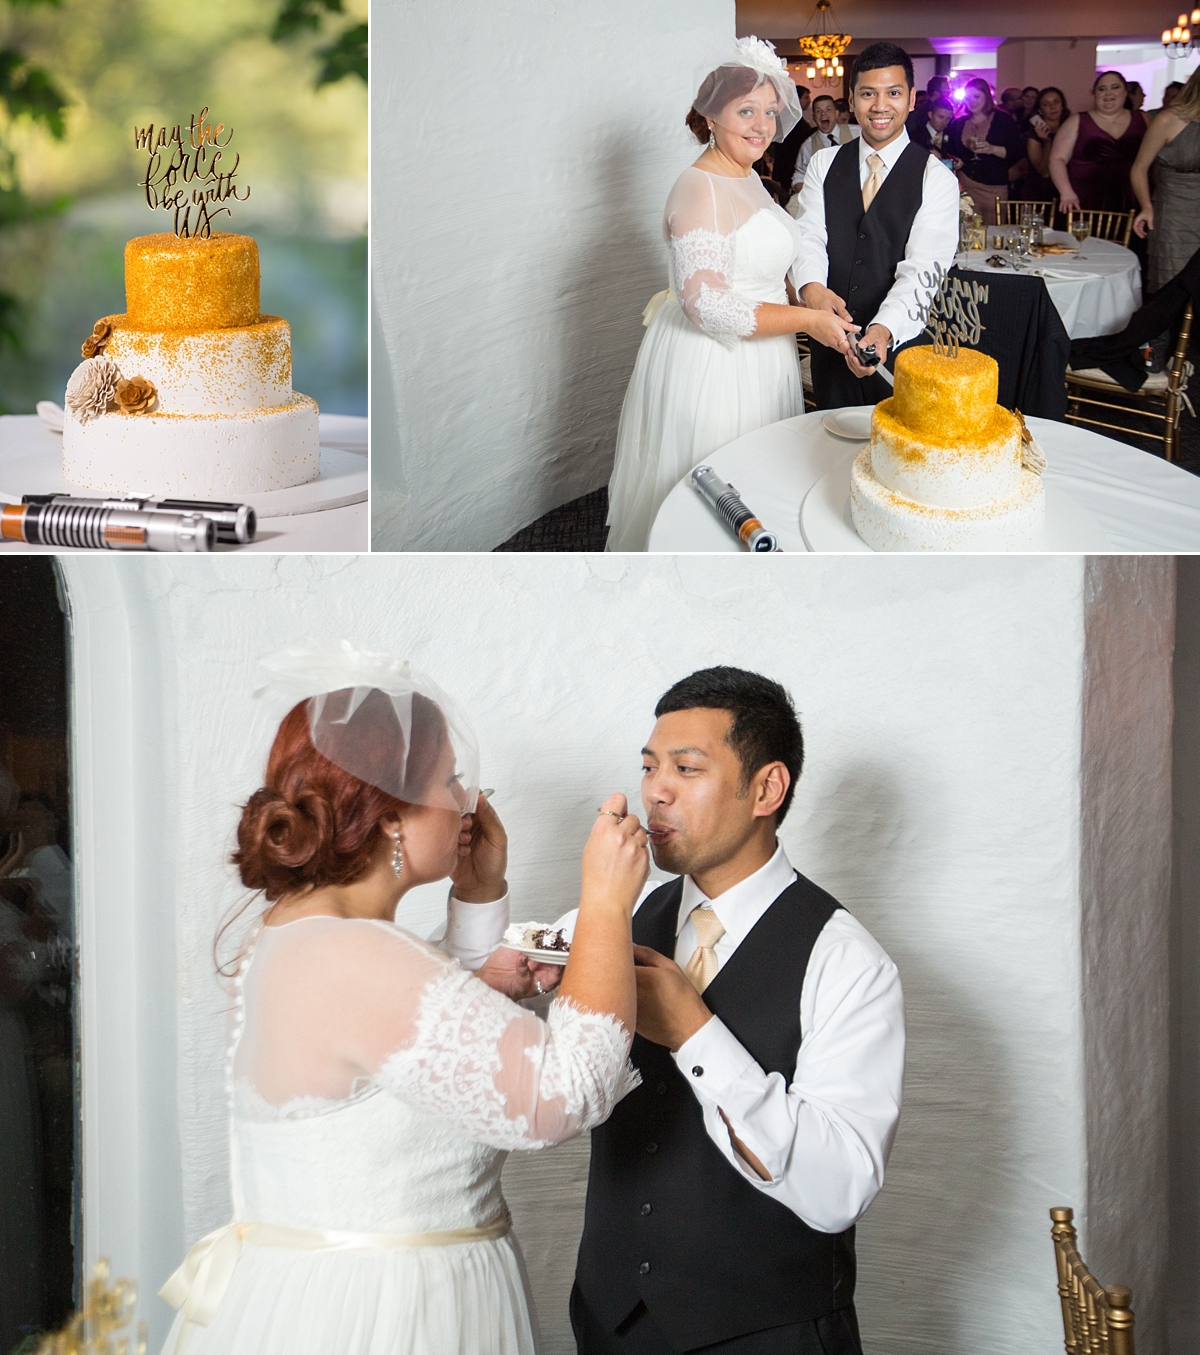 beardslee castle, little falls, ny, sarah heppell photography, newlyweds cutting cake, cake cutting ceremony, may the force be with us cake topper, star wars, star wars cake topper, star wars cake knife and server